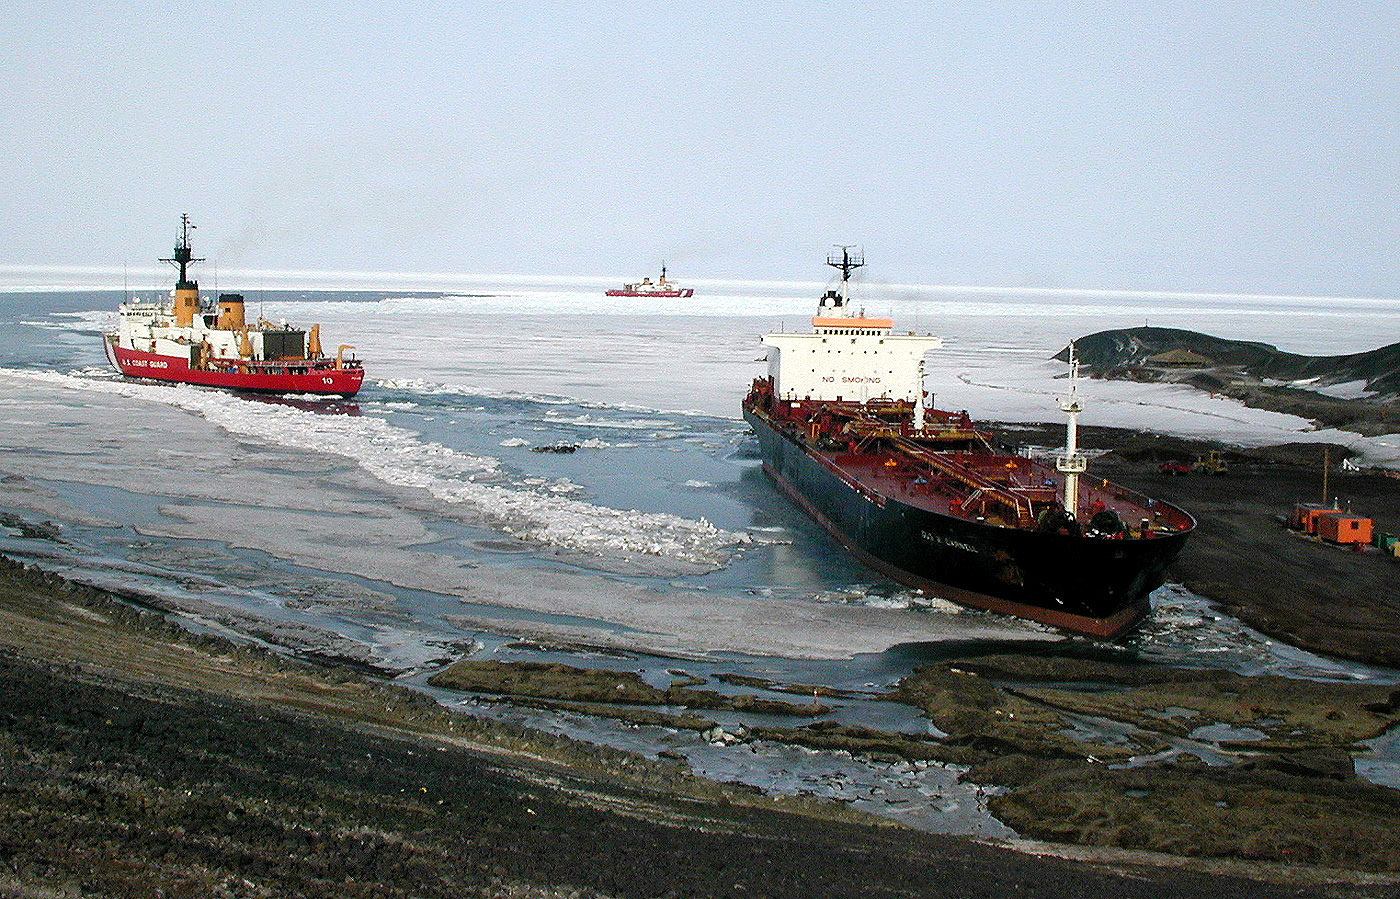 the icebreakers guide the tanker Gus C. Darnell